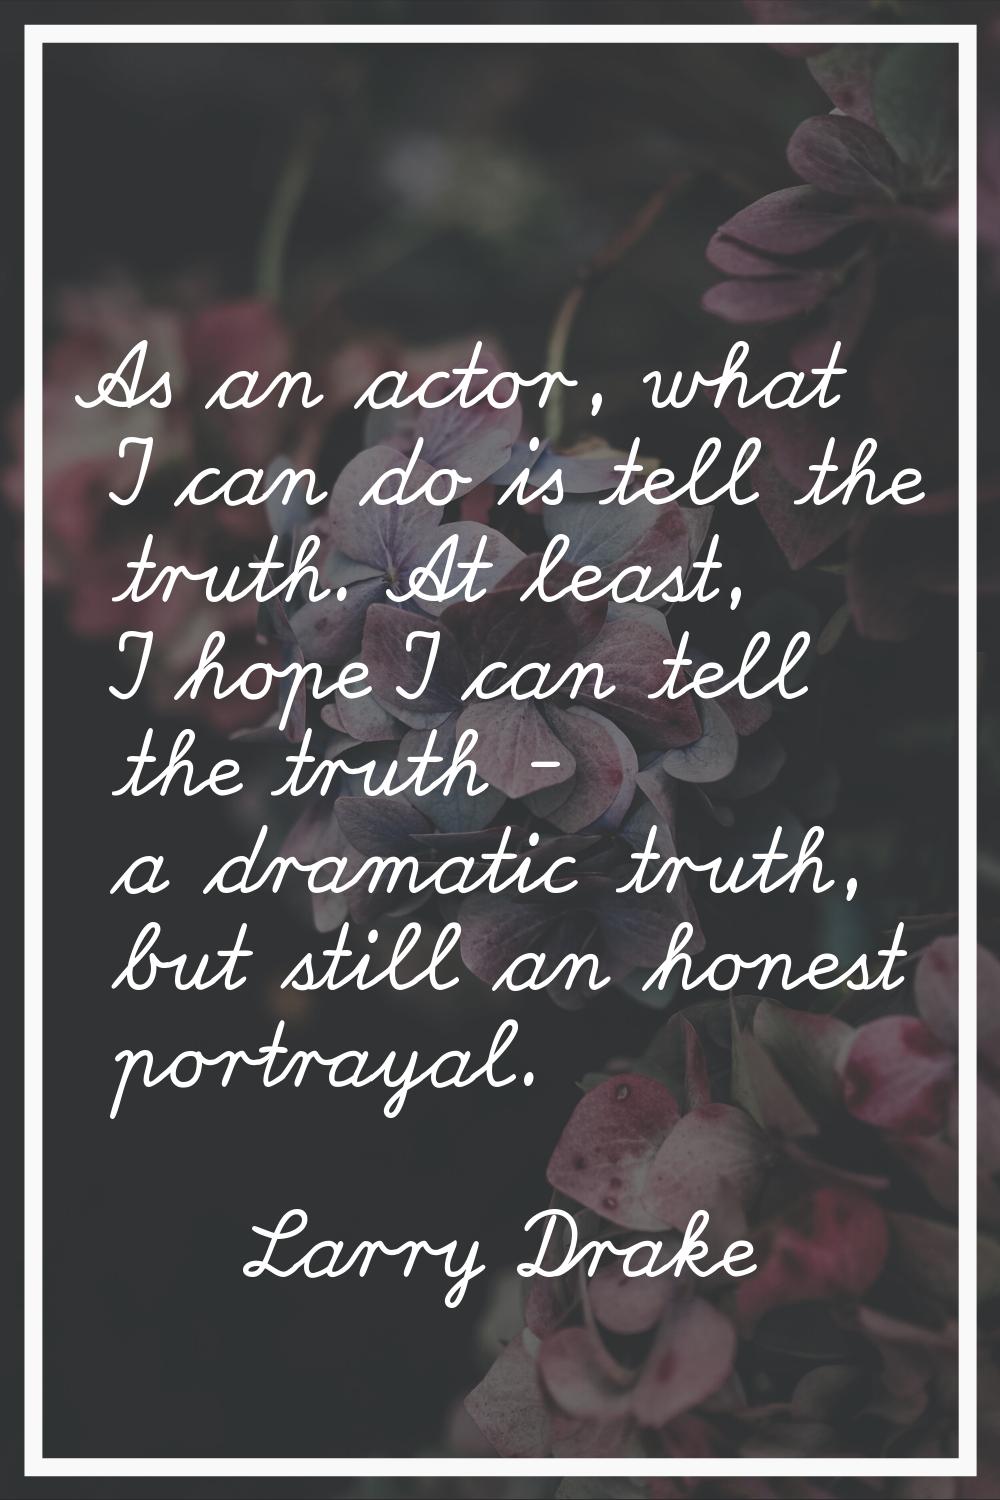 As an actor, what I can do is tell the truth. At least, I hope I can tell the truth - a dramatic tr